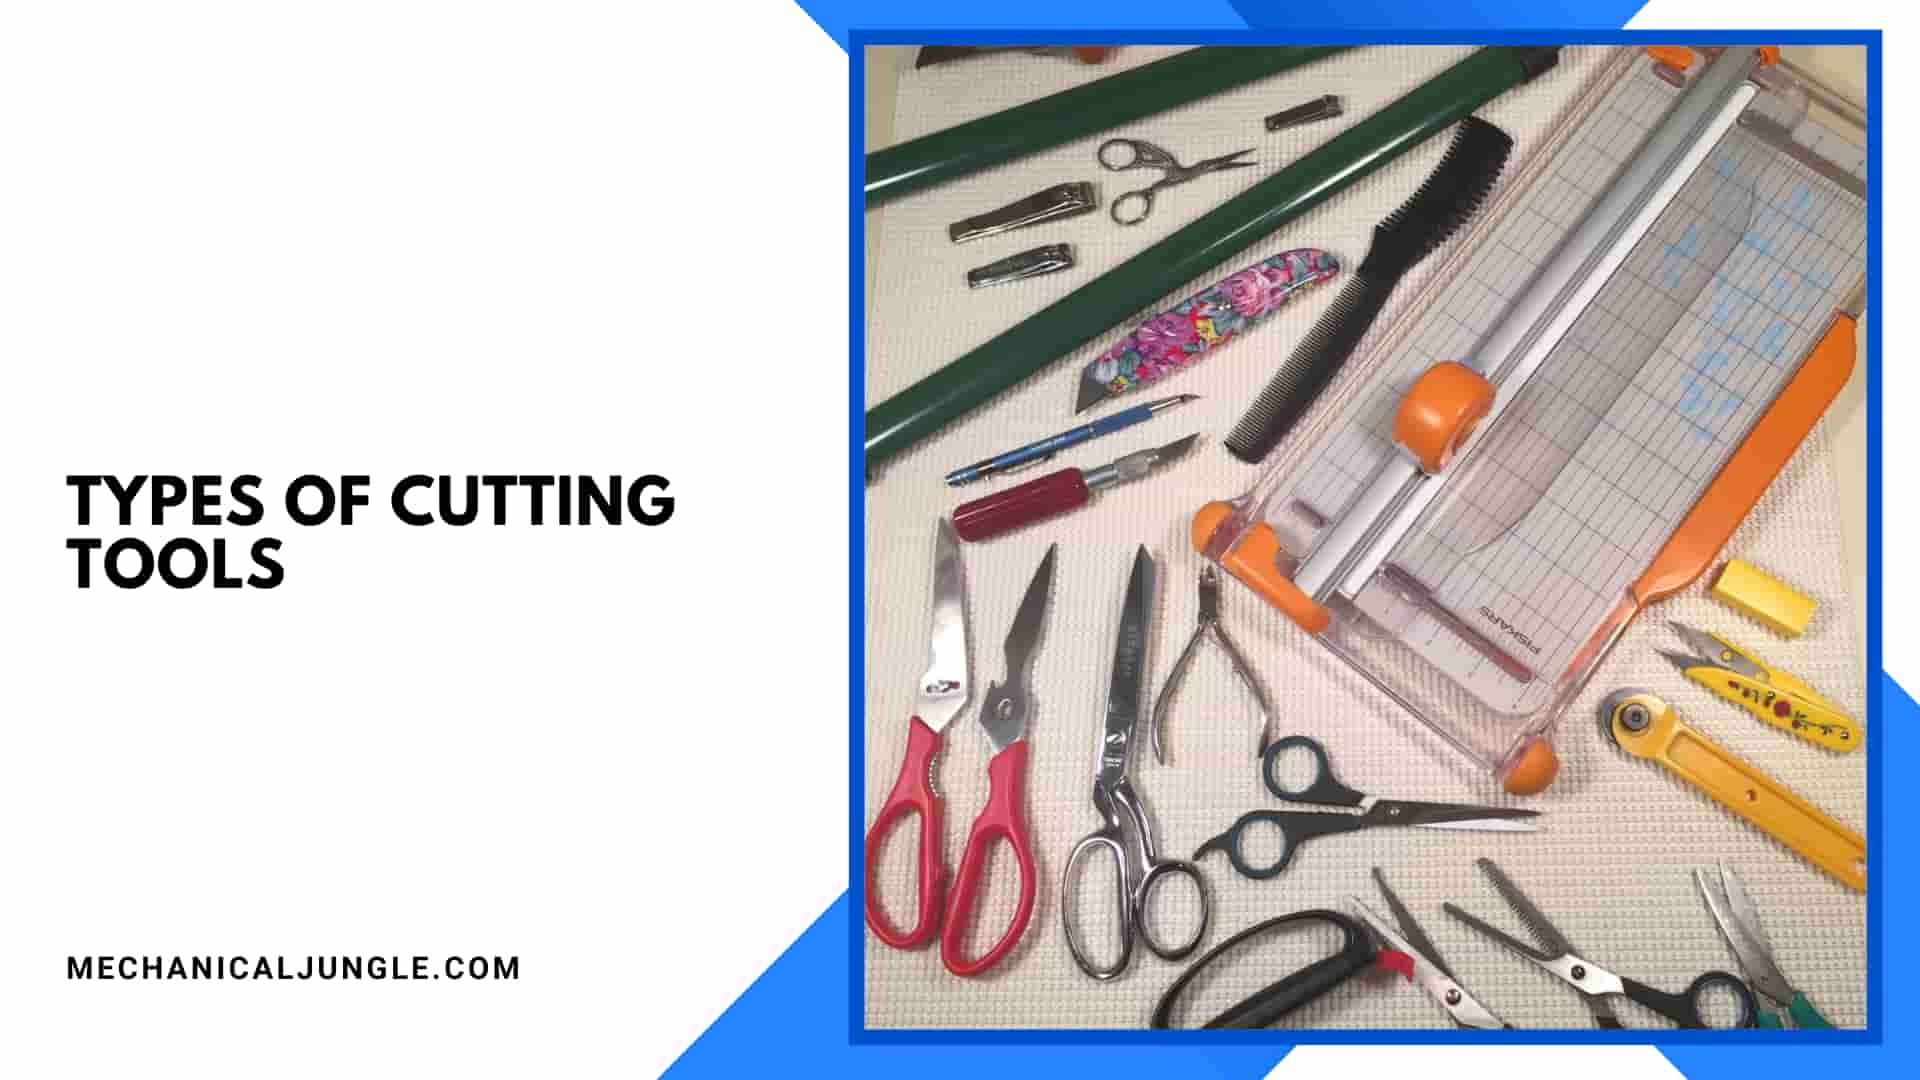 Types of Cutting Tools